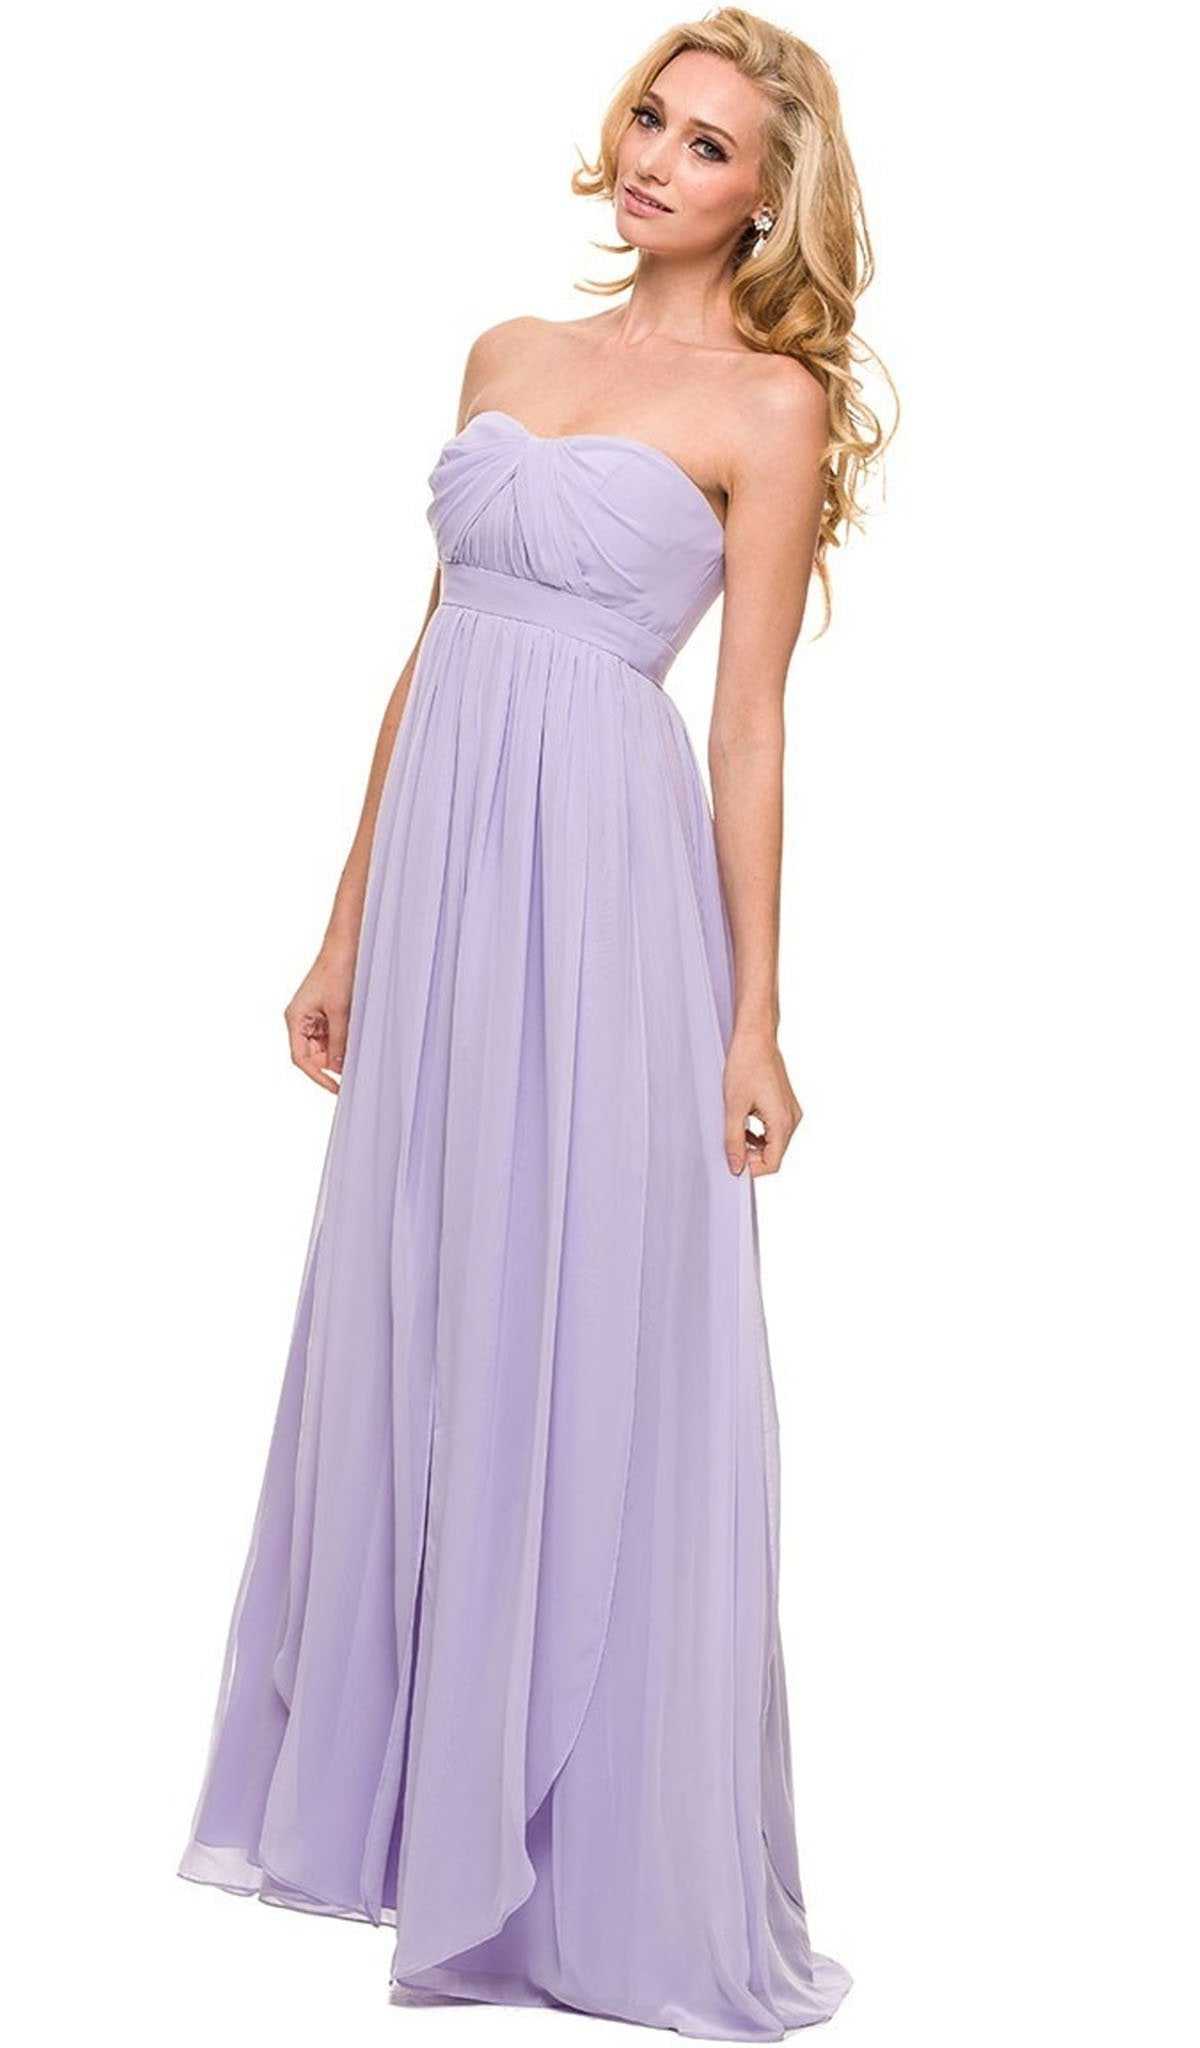 Nox Anabel, Nox Anabel - 7124 Pleated Sweetheart A-line Long Formal Gown